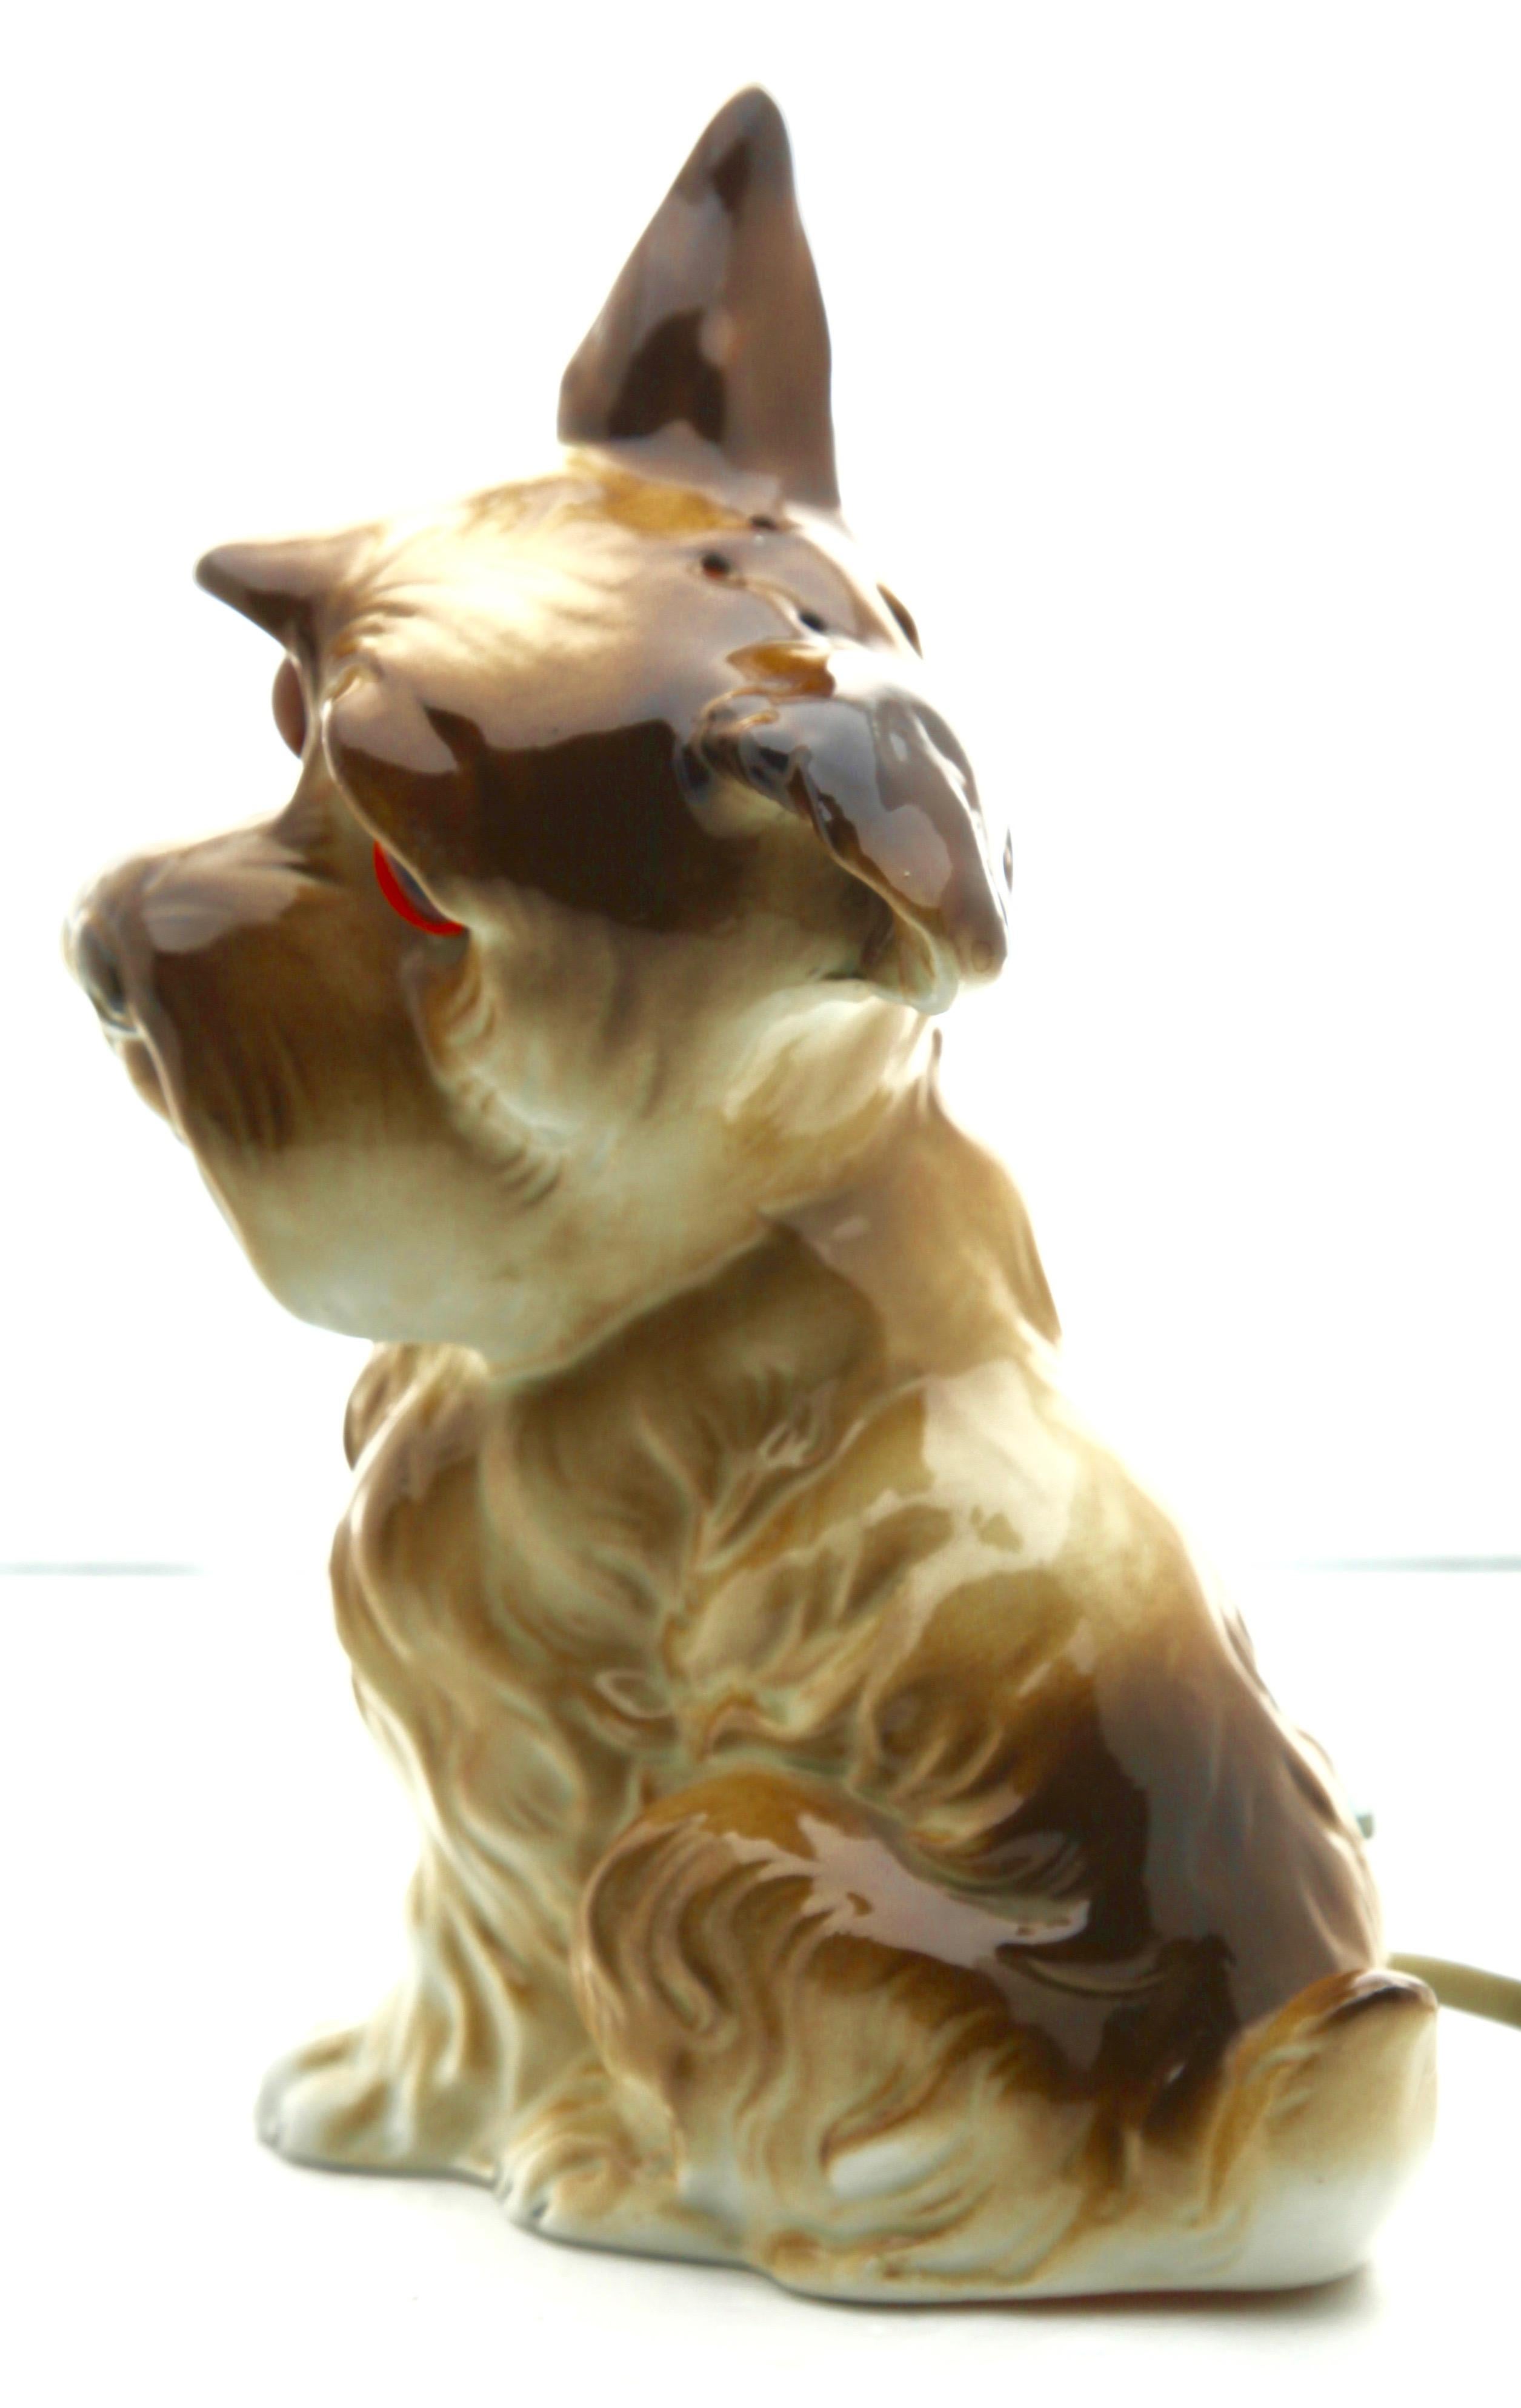 Rare and gorgeous dog perfume lamp attributed to Carl Scheidig Grafenthal, Germany.
Excellent condition, lamp is in working order.
Size: Height 17 cm, 6.7 in, width 11 cm, 4.33 in.
Germany, 1930s, excellent condition
Porcelain figurine / air